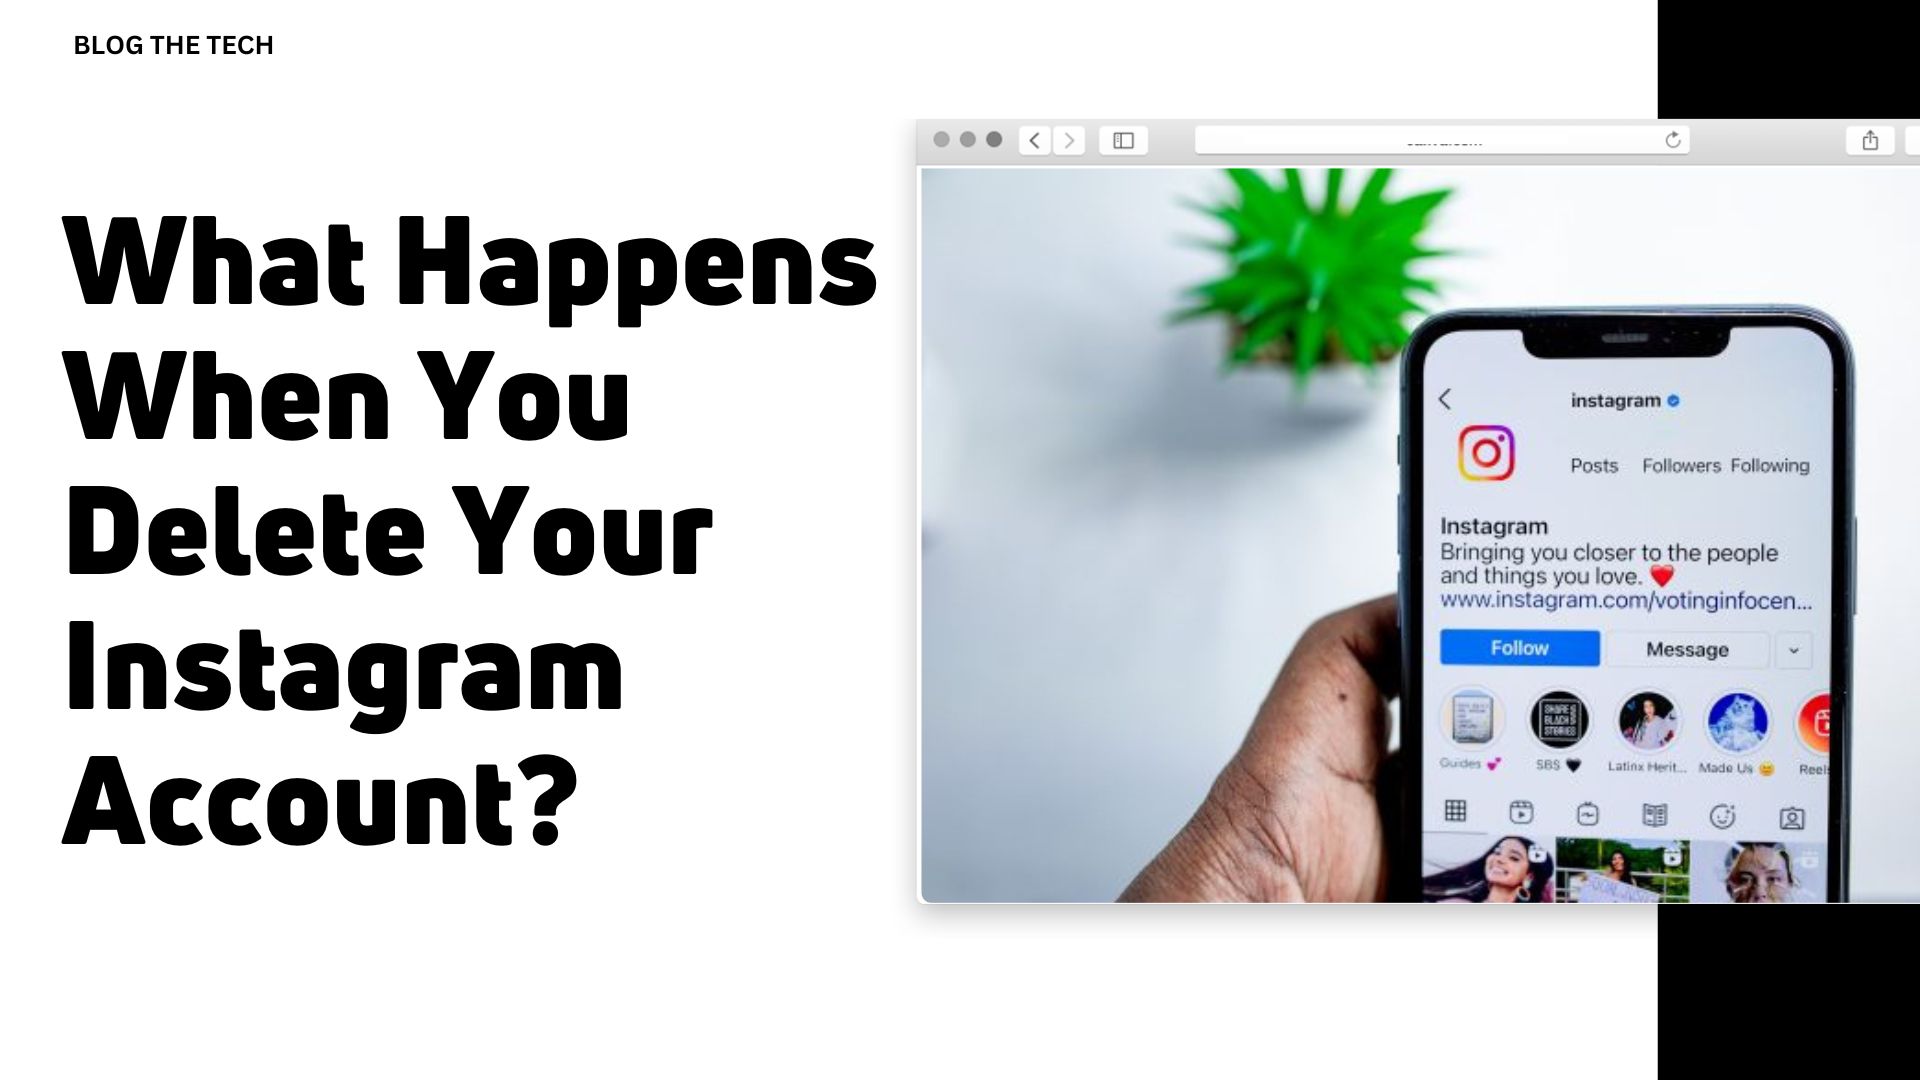 What Happens When You Delete Your Instagram Account?